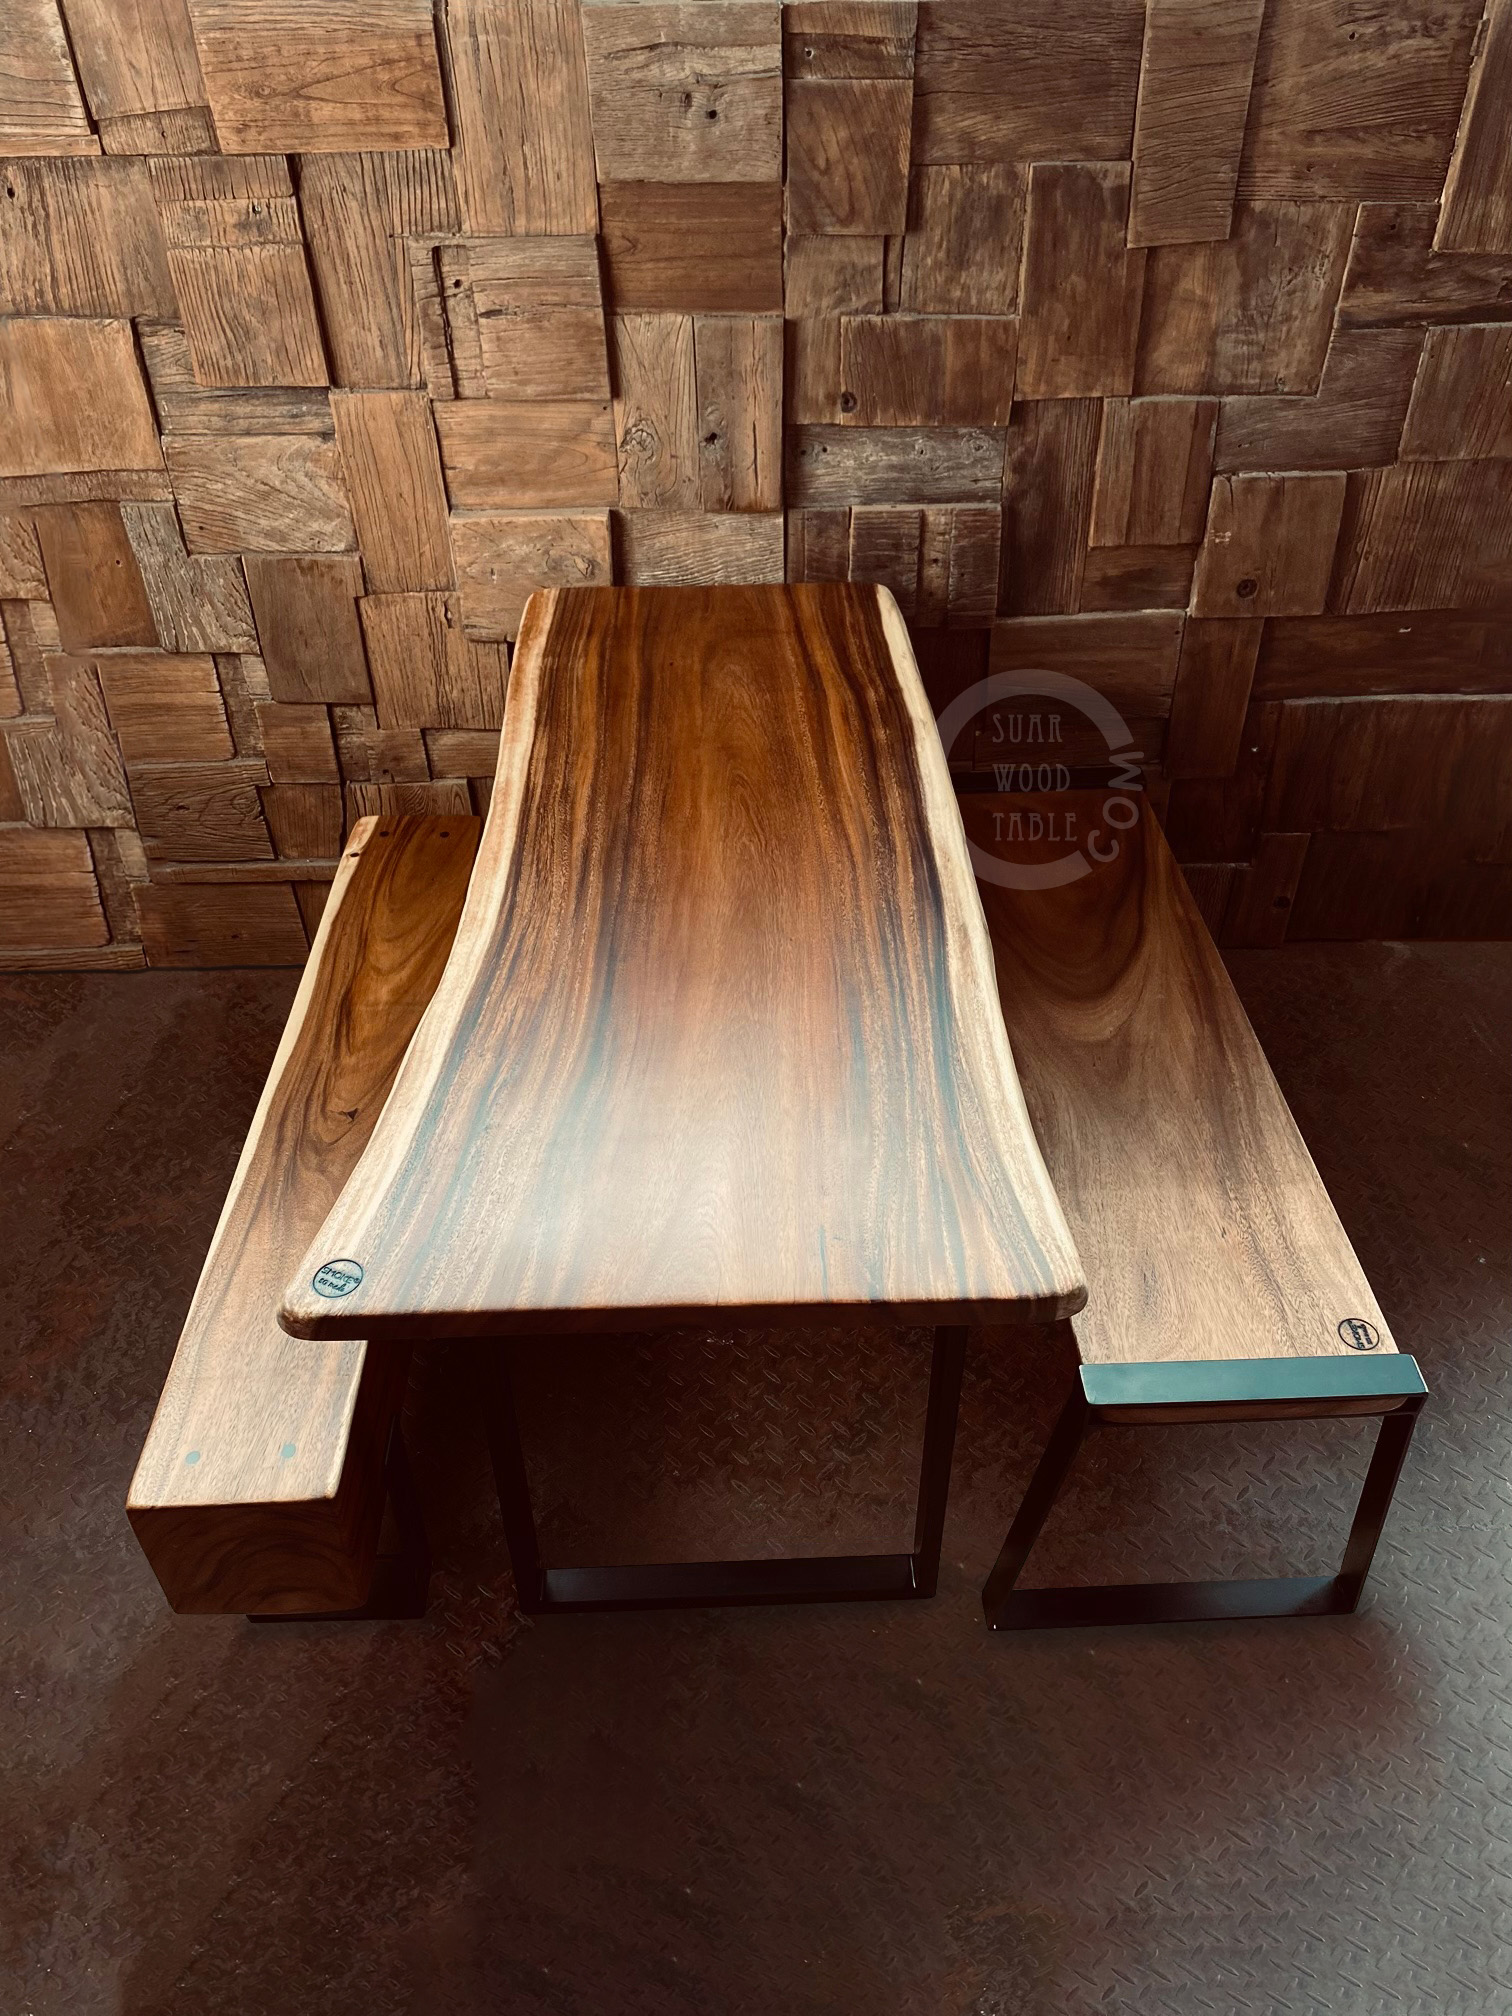 Suar Wood Singapore Dining Table with Designer Benches